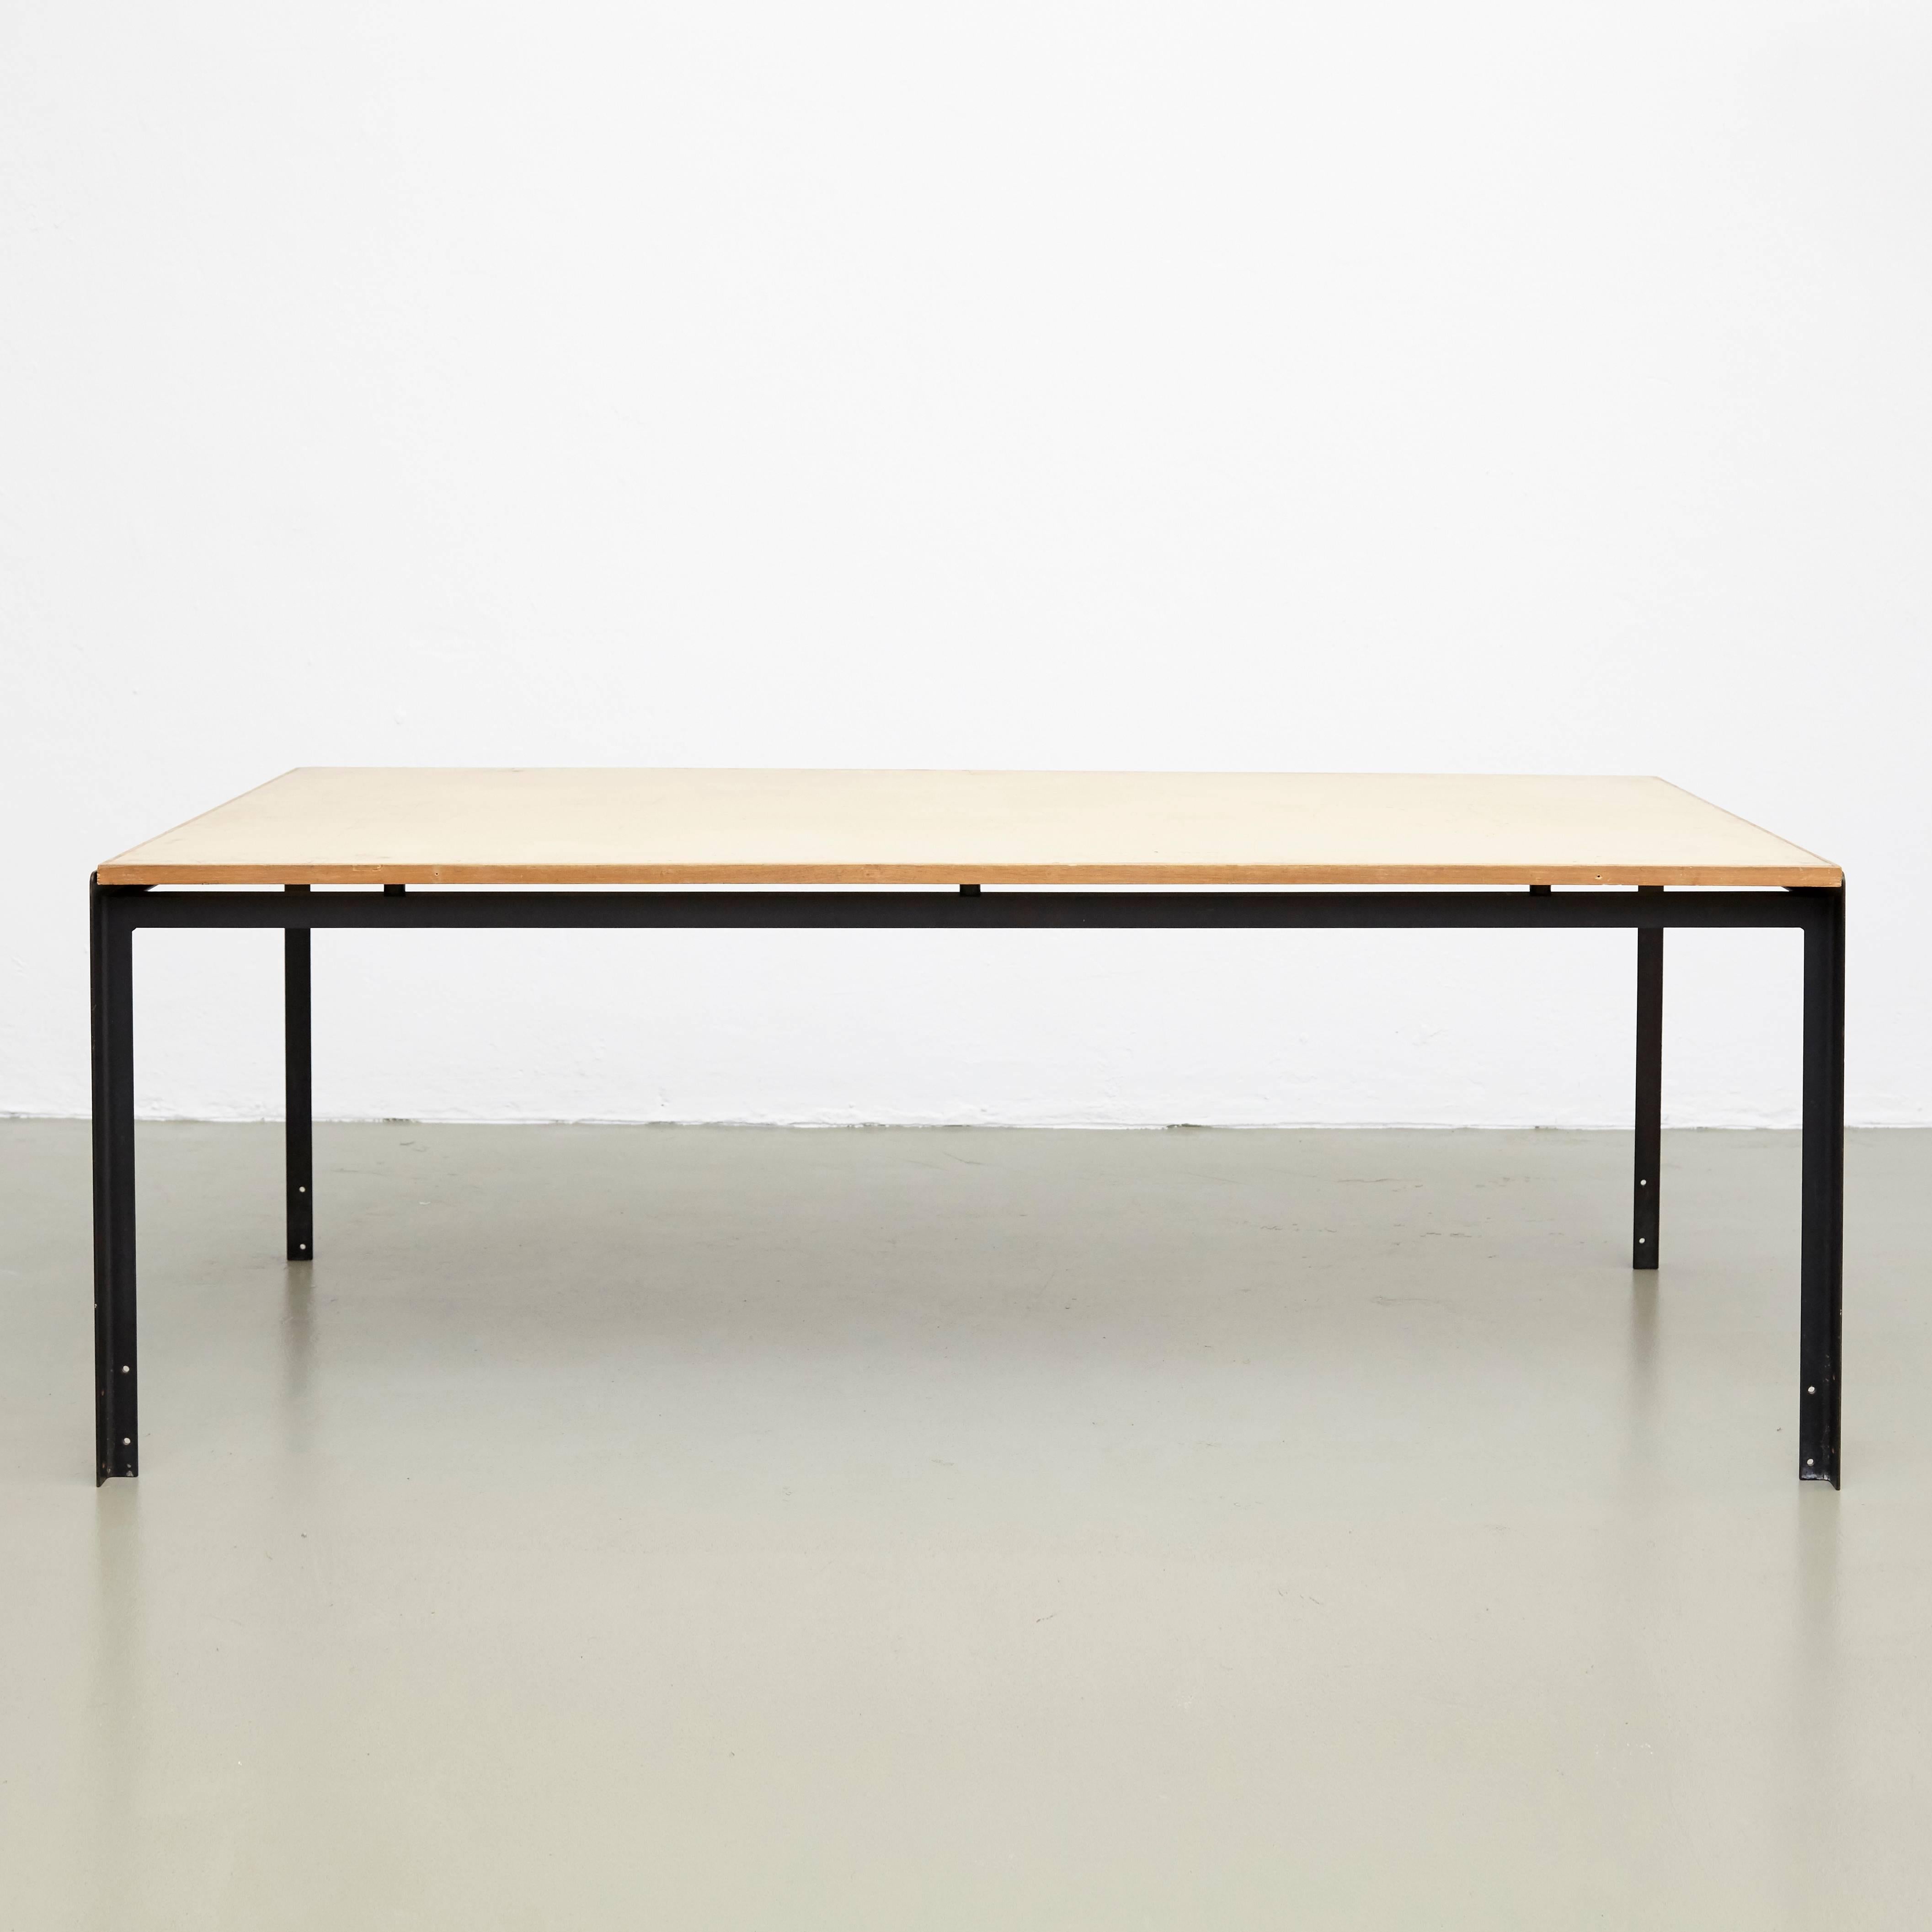 Professors desk designed by Poul Kjaerholm manufactured by Rud Rasmussen in Denmark.

Wood linoleum tabletops and lacquered metal legs 

In good original condition, with minor wear consistent with age and use, preserving a beautiful patina. 

Poul